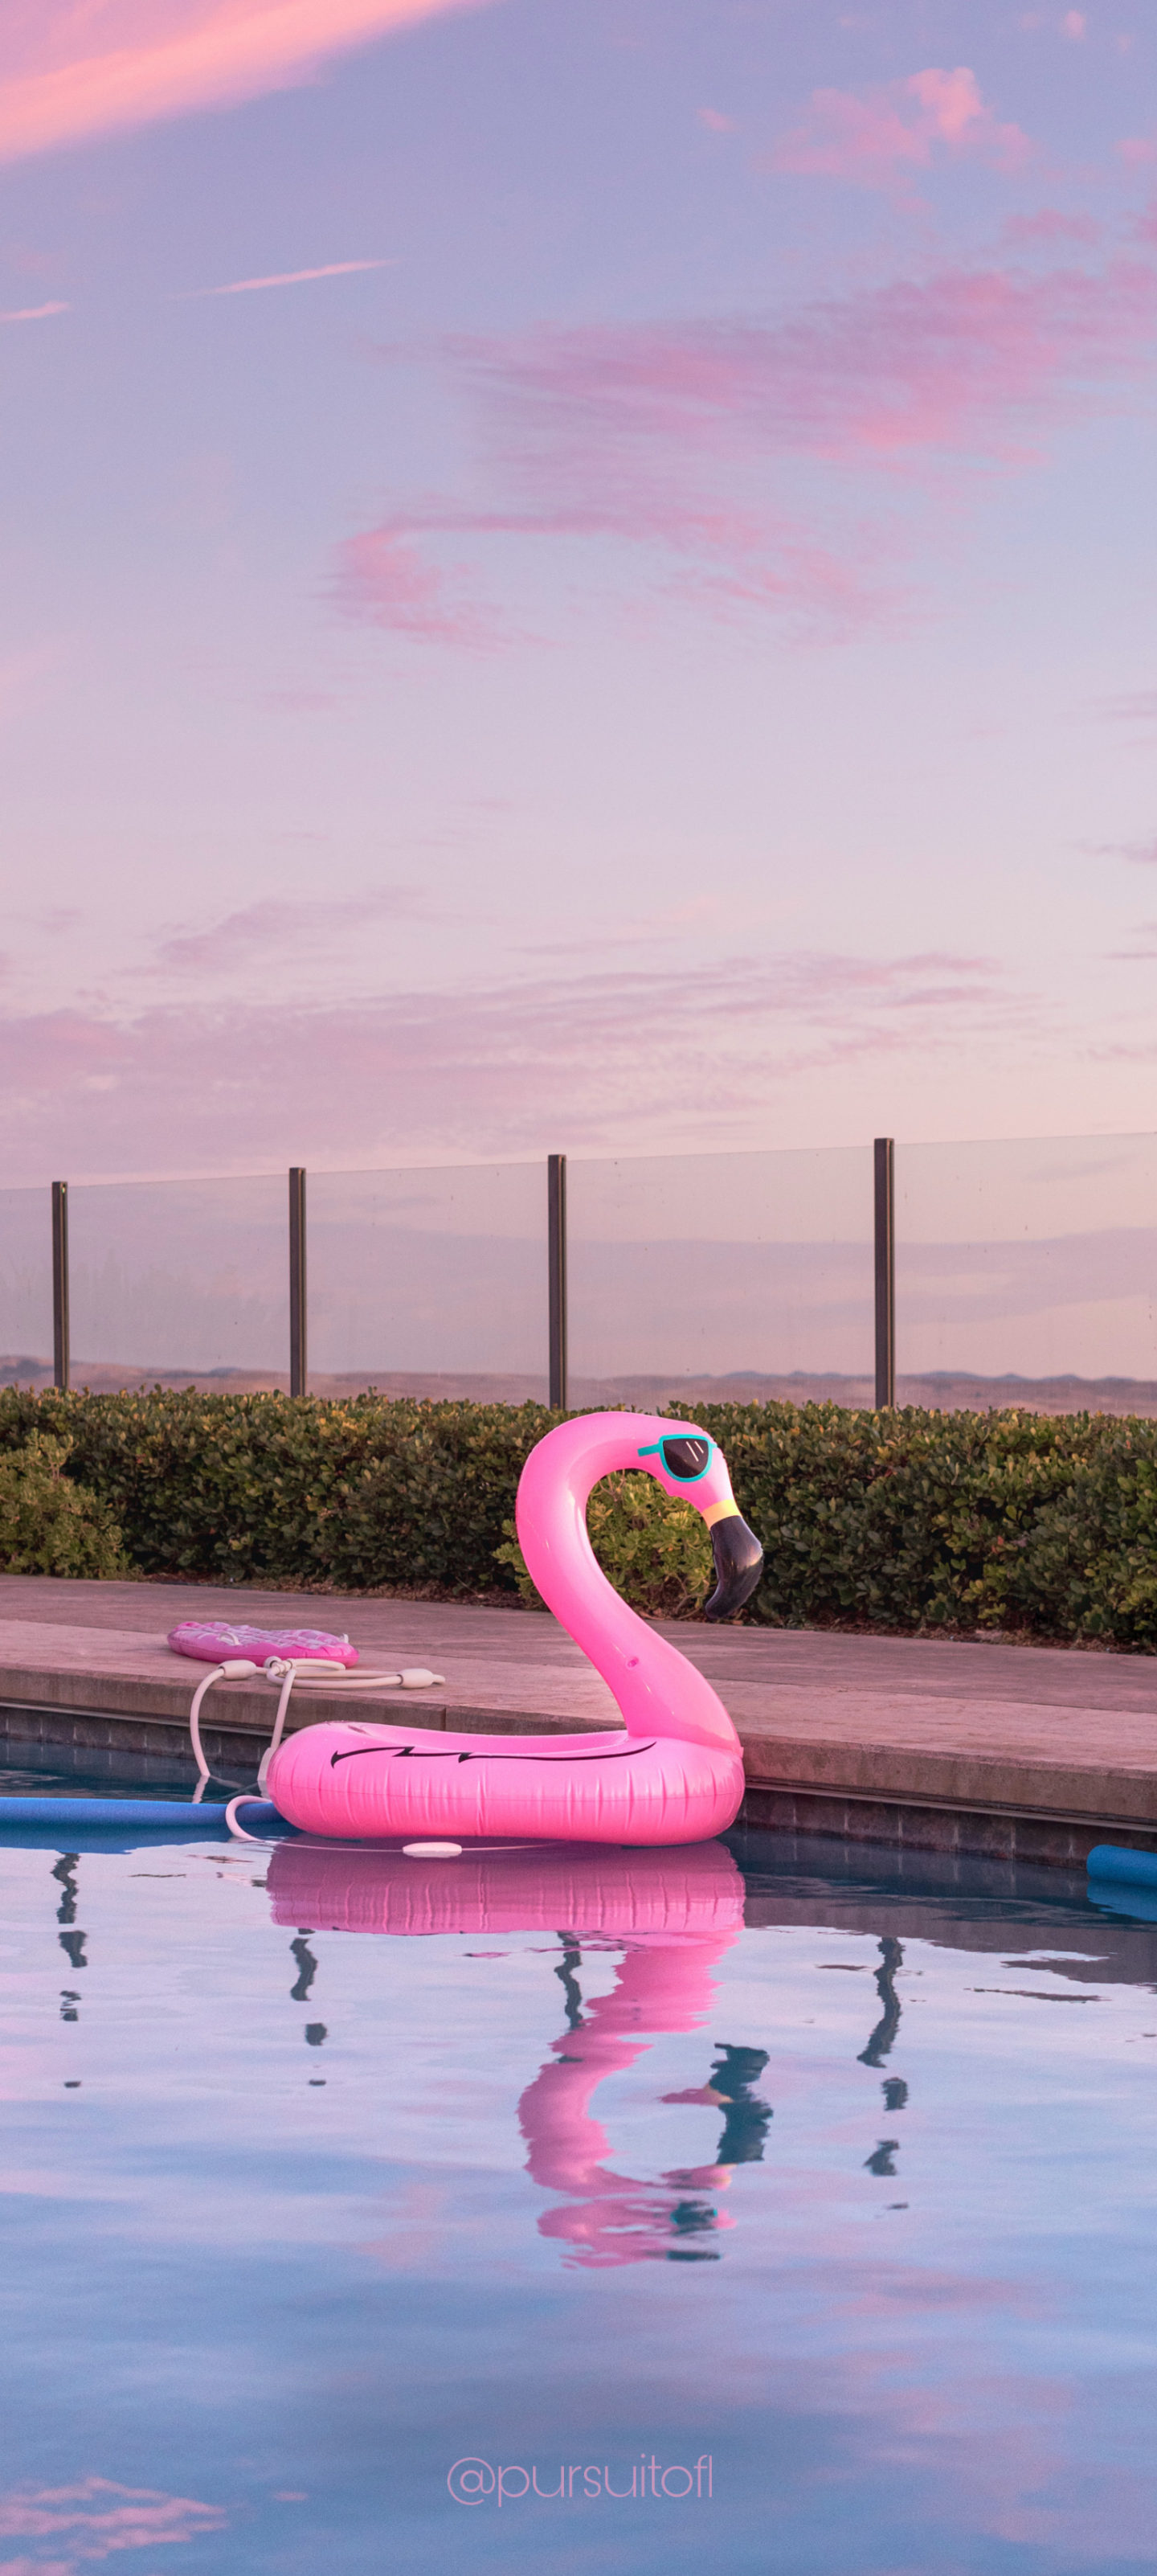 Pink flamingo float in a pool summer phone wallpaper with pink sky